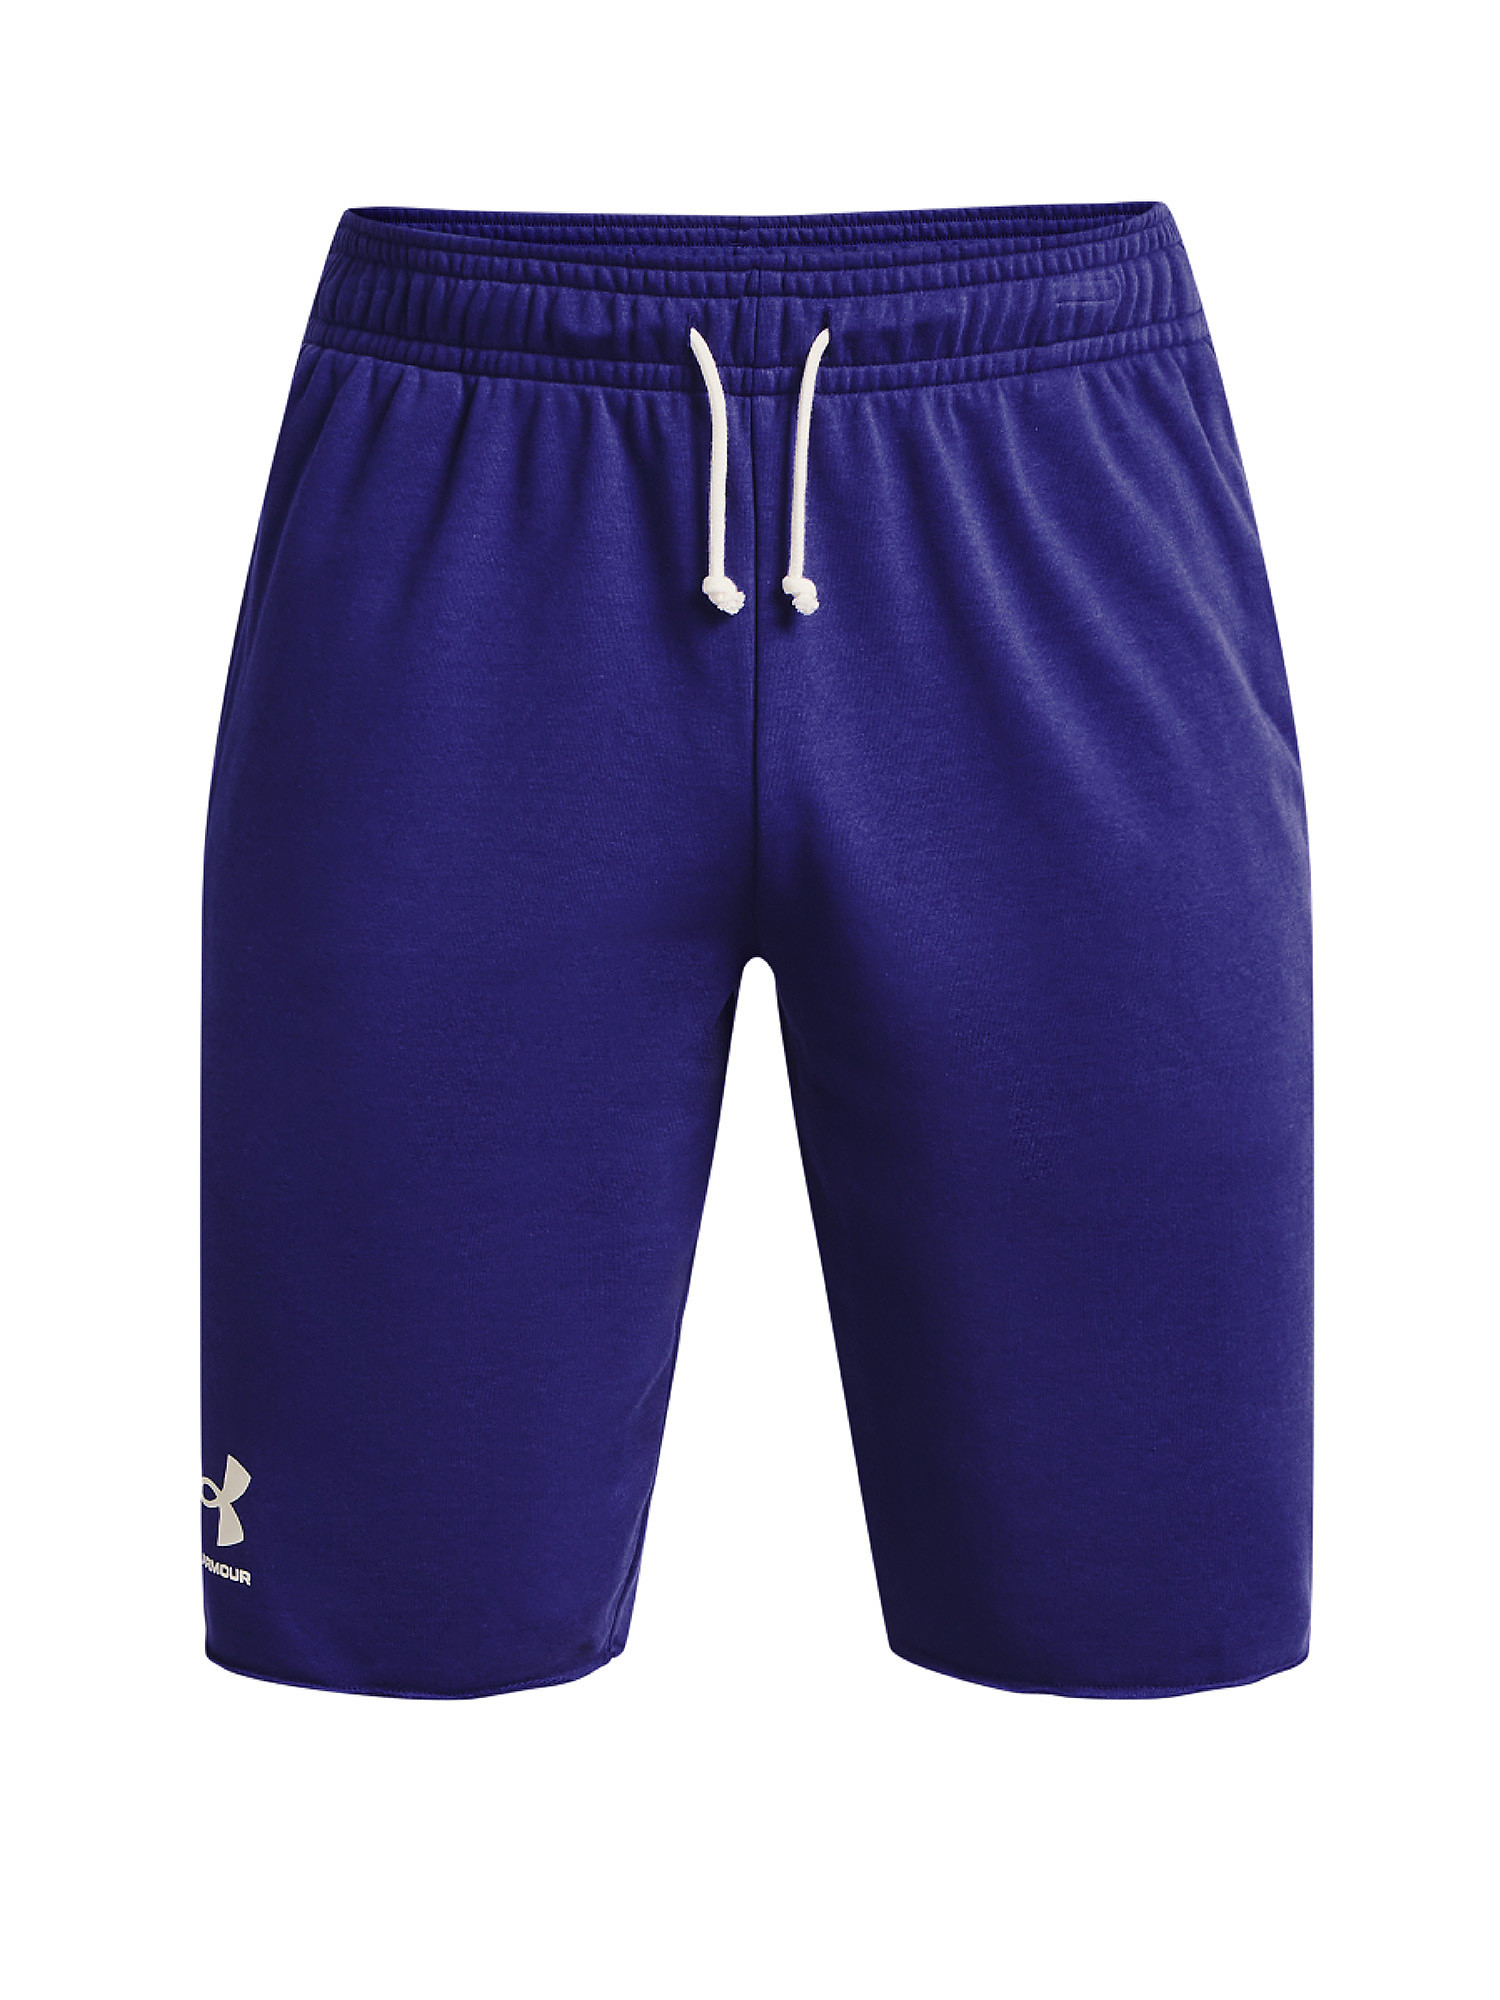 UA Rival Terry Shorts, Royal Blue, large image number 0